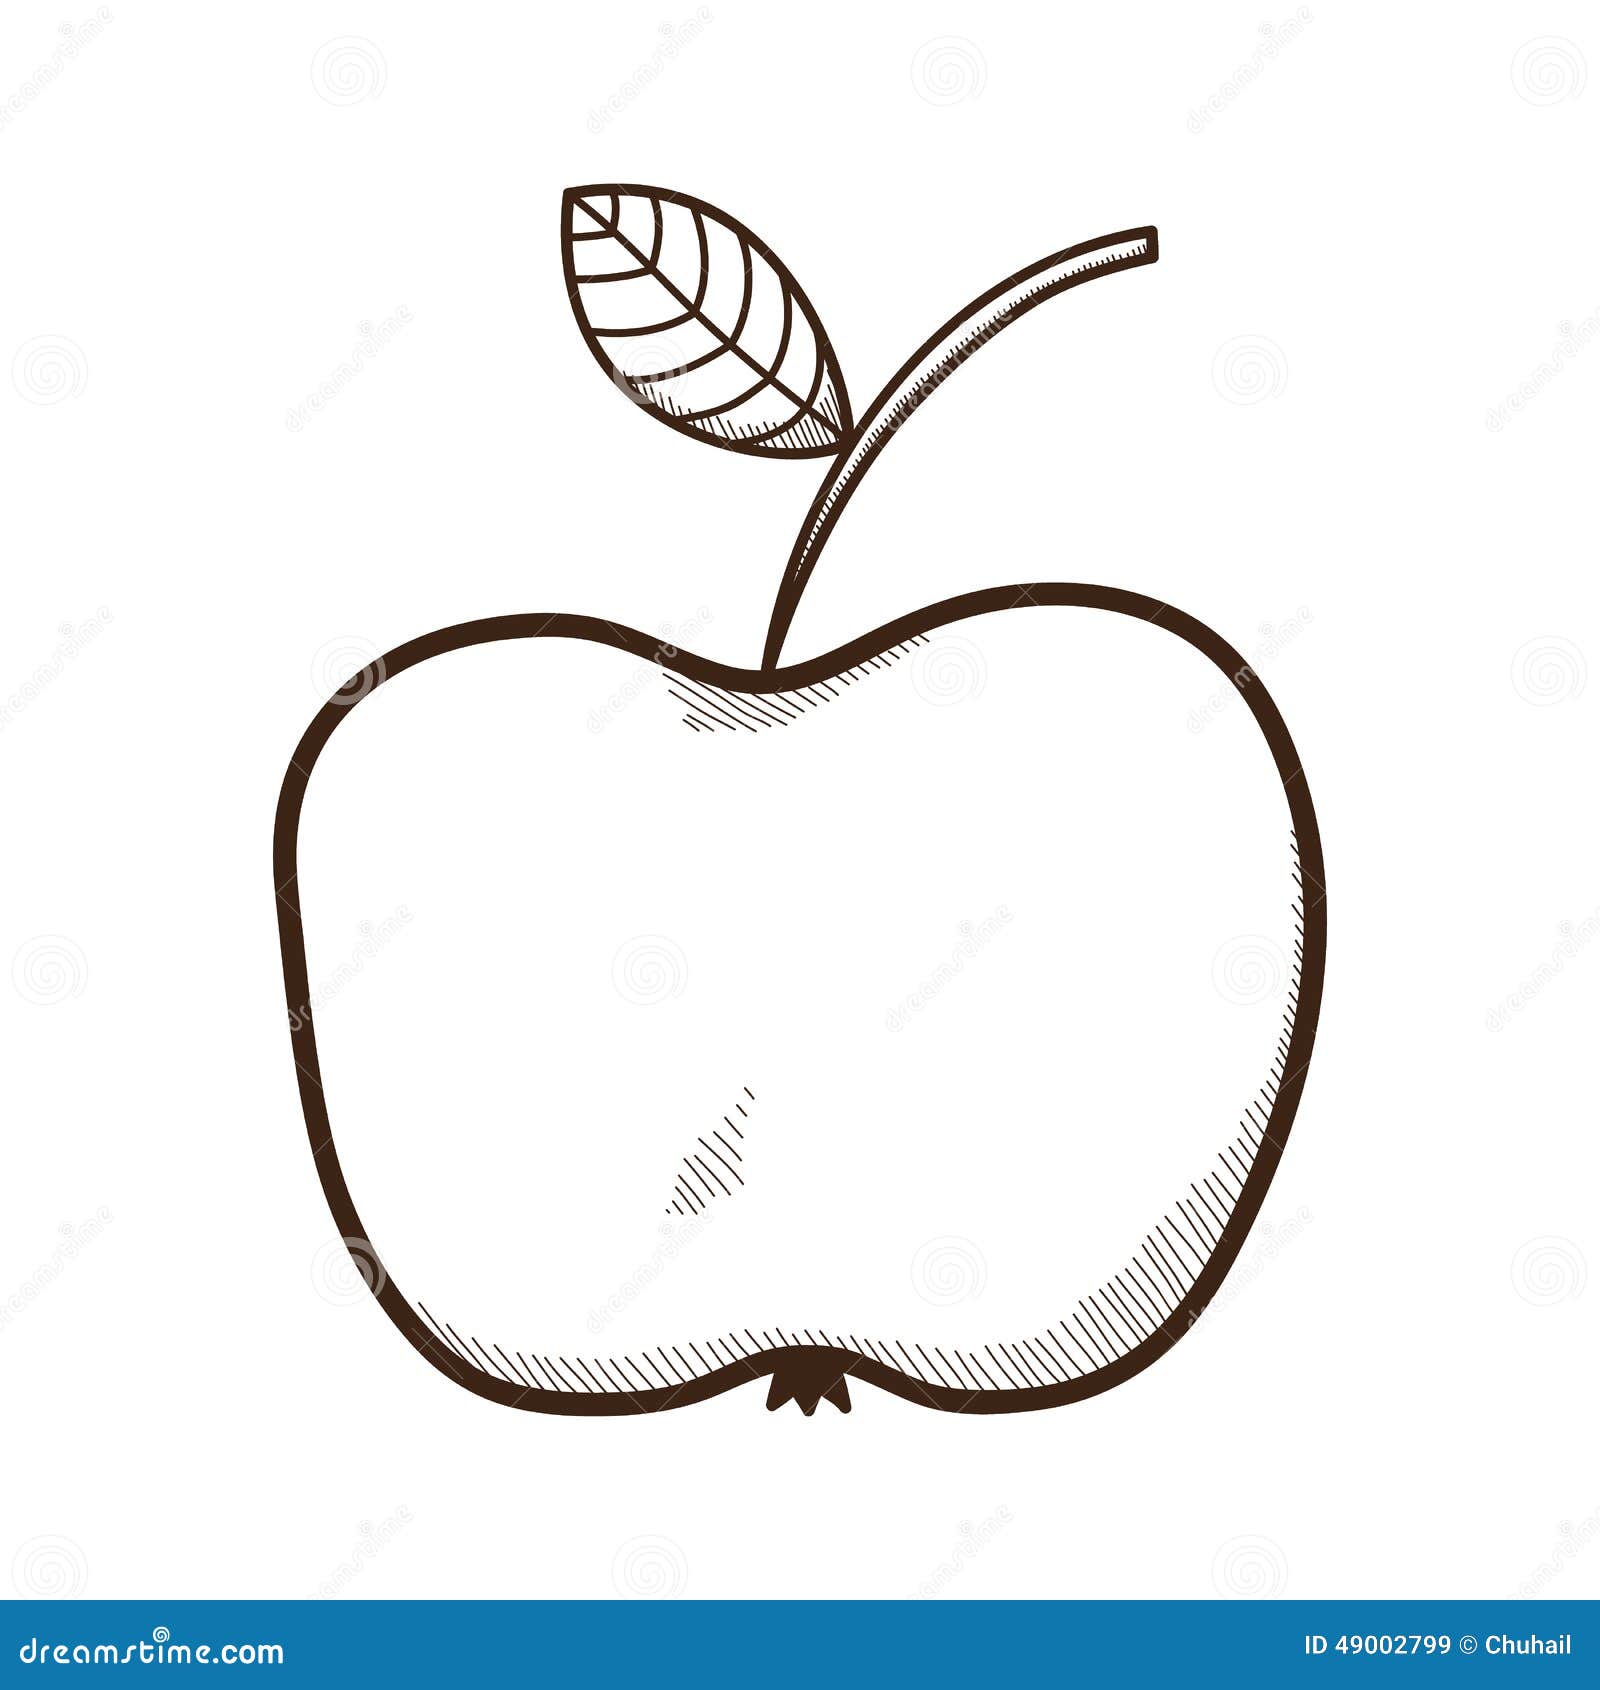 How To Draw An Apple For Kids? An Easy Step-By-Step Guide